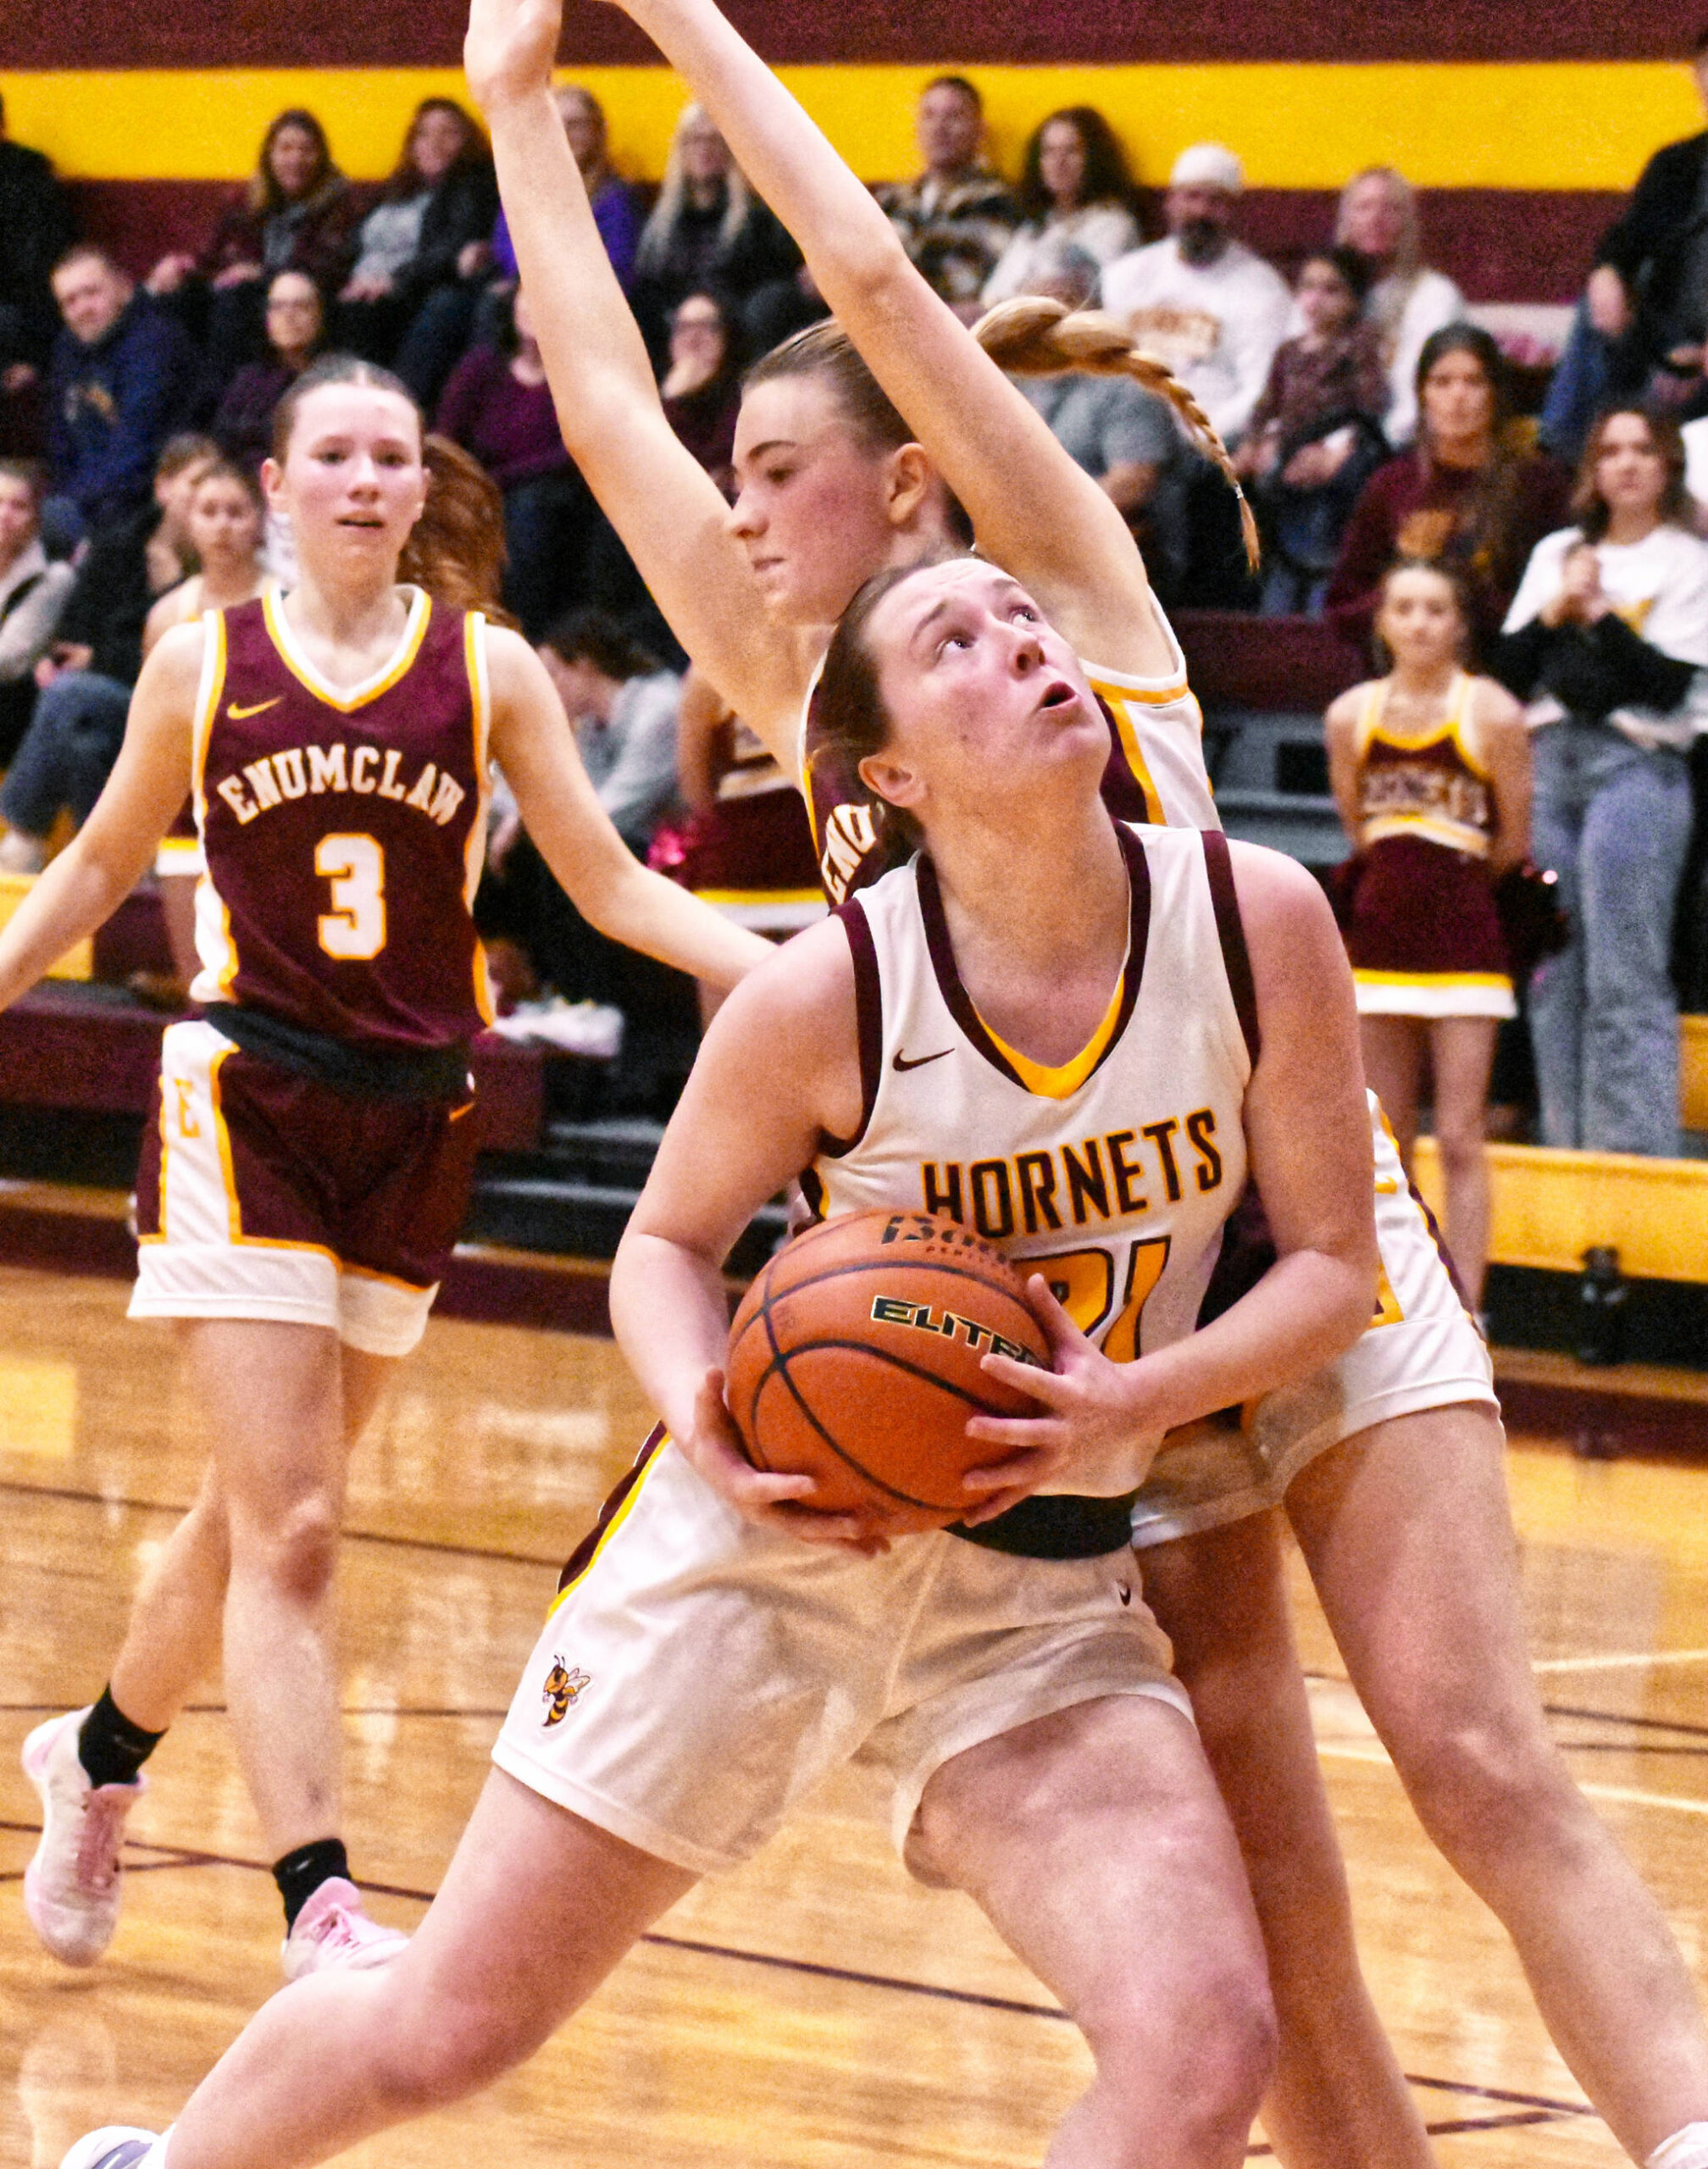 White River’s Ava Bright slips past an Enumclaw defender on her way to the hoop during her team’s January 10, home-court victory. Photo by Kevin Hanson